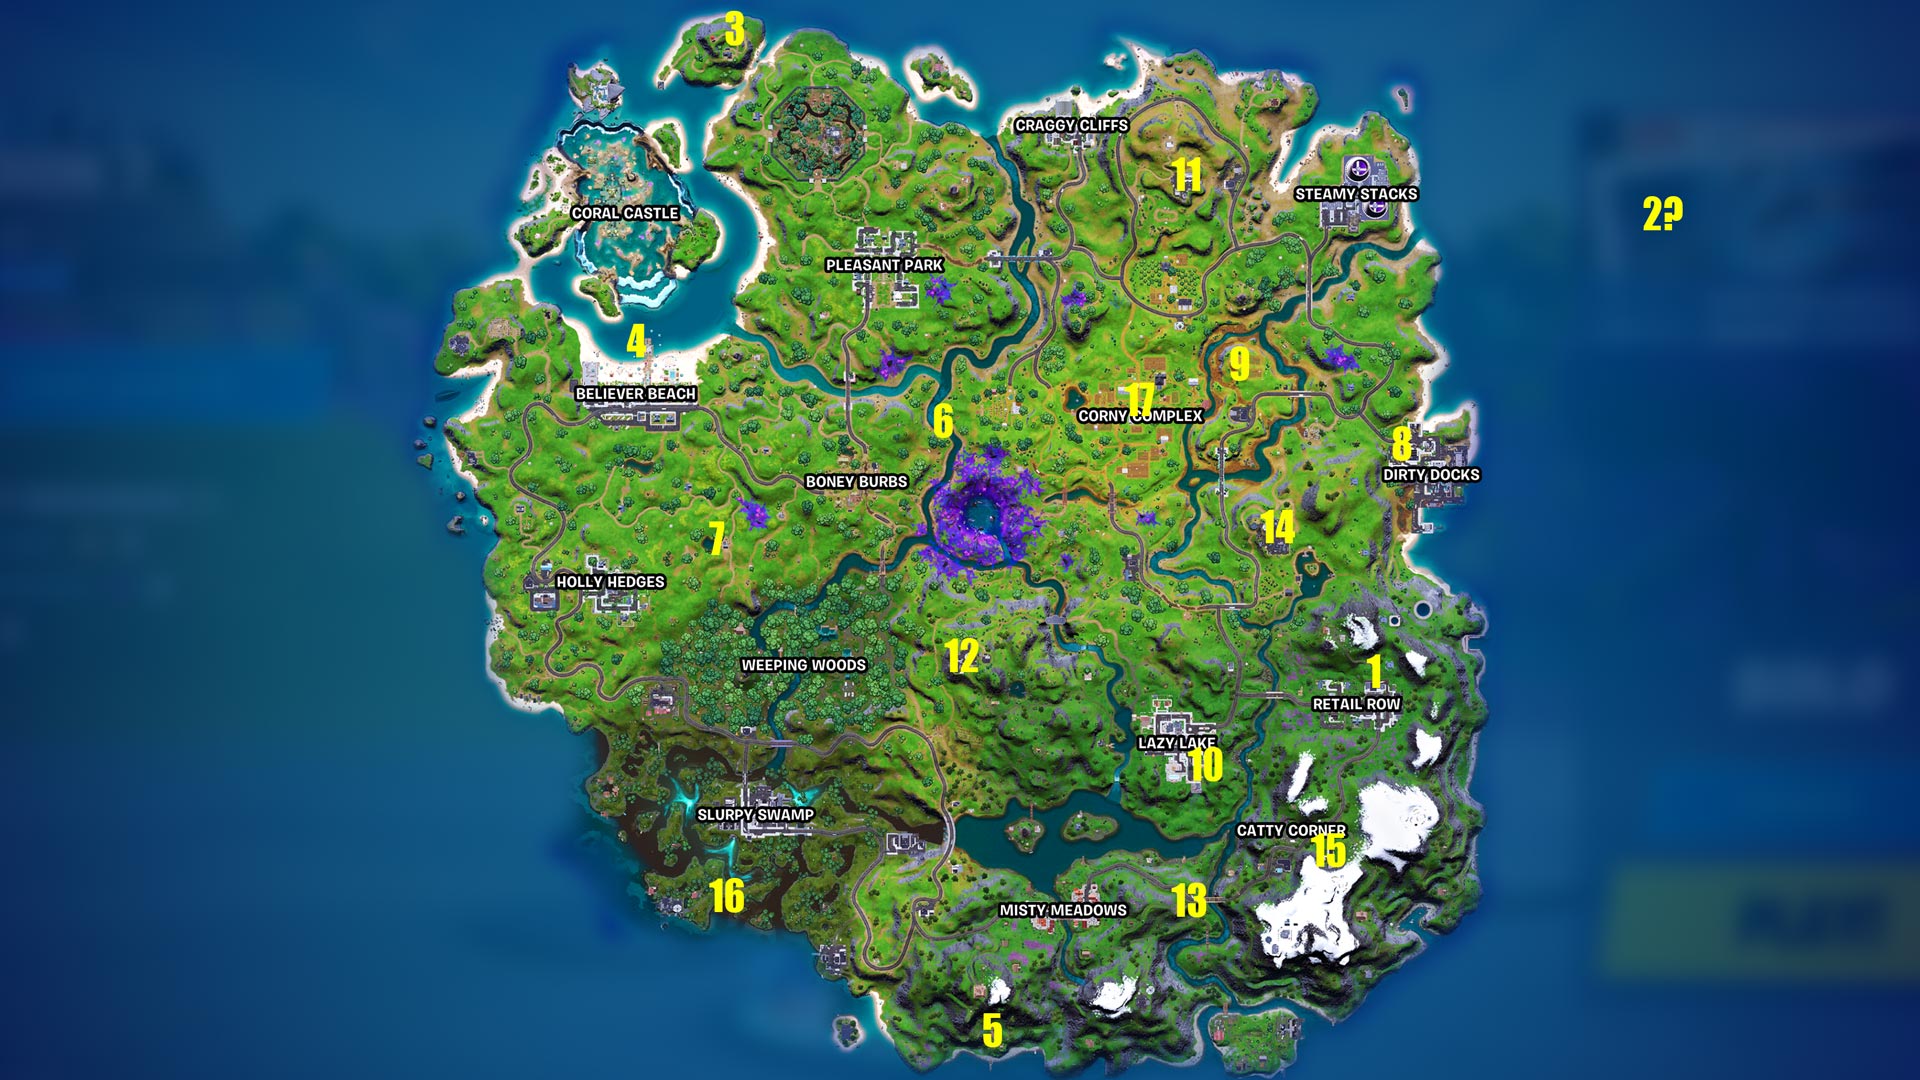 Character All Npc Locations Fortnite Season 7 Fortnite Guide All 17 Season 7 Npc Character Locations What They Have